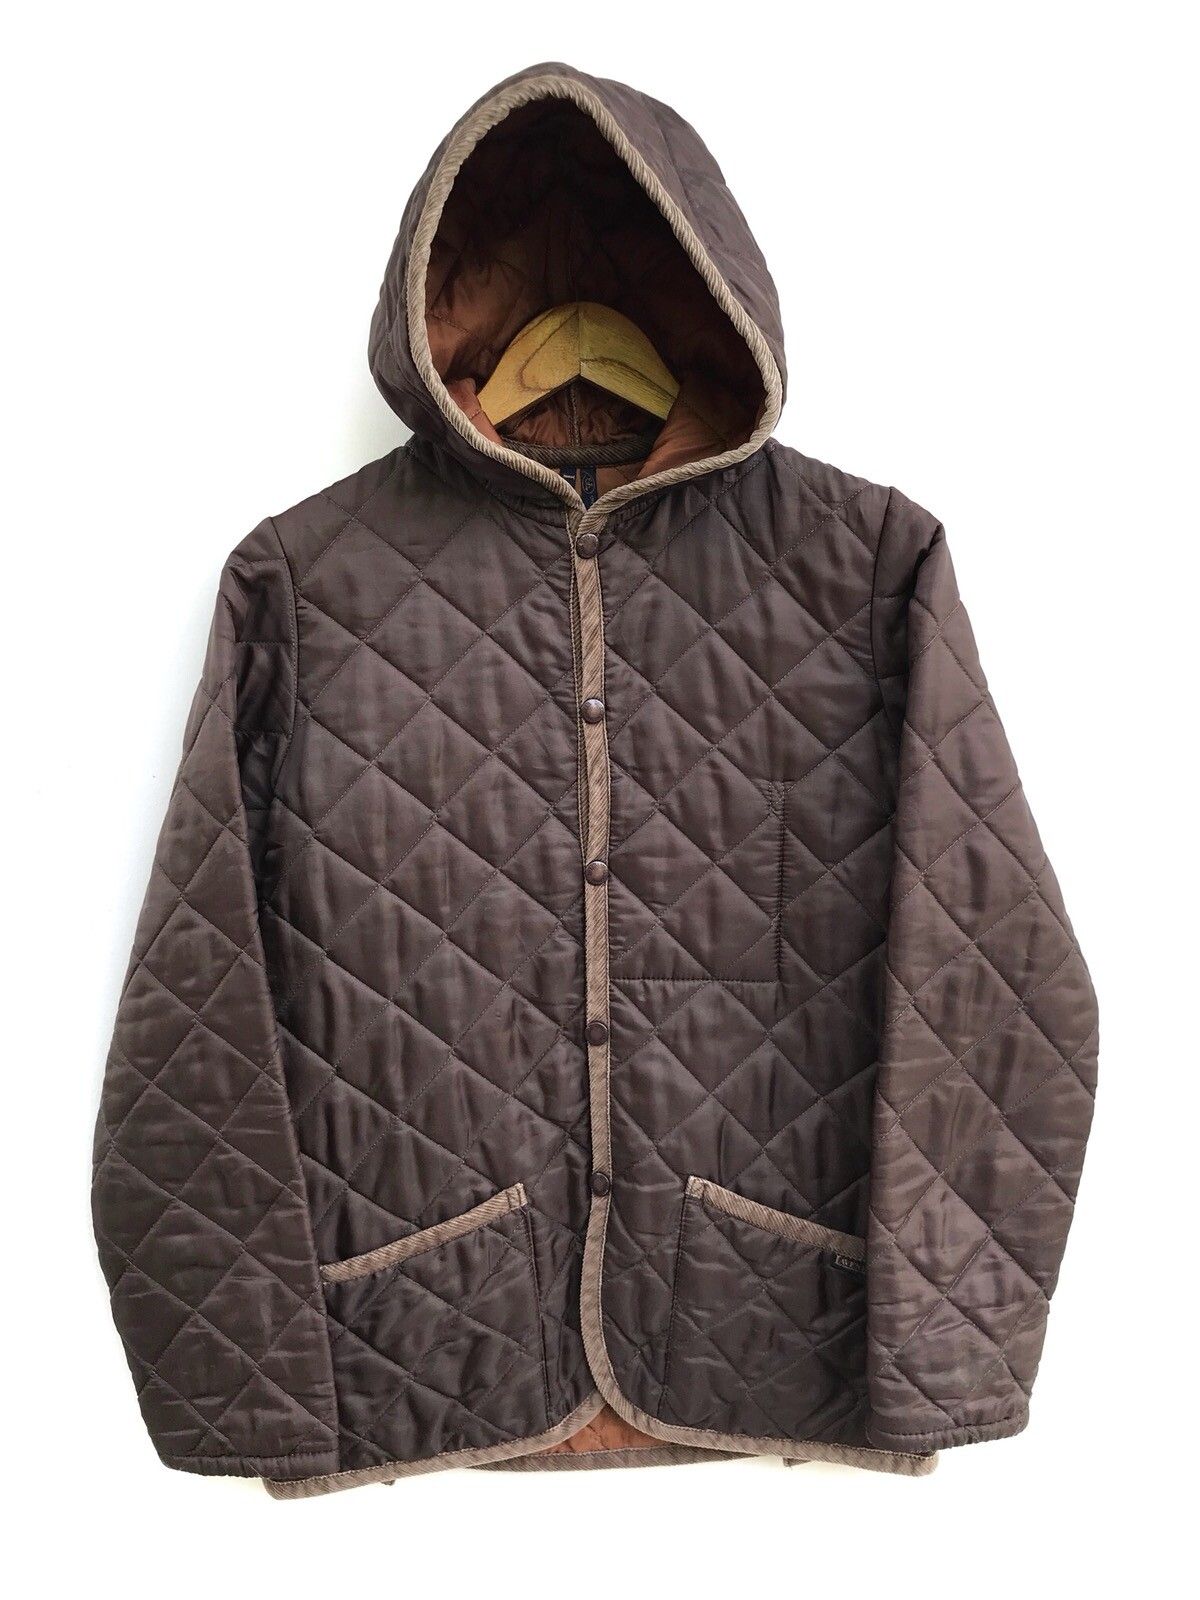 Lavenham Lavenham Made In England Quilted Jacket | Grailed